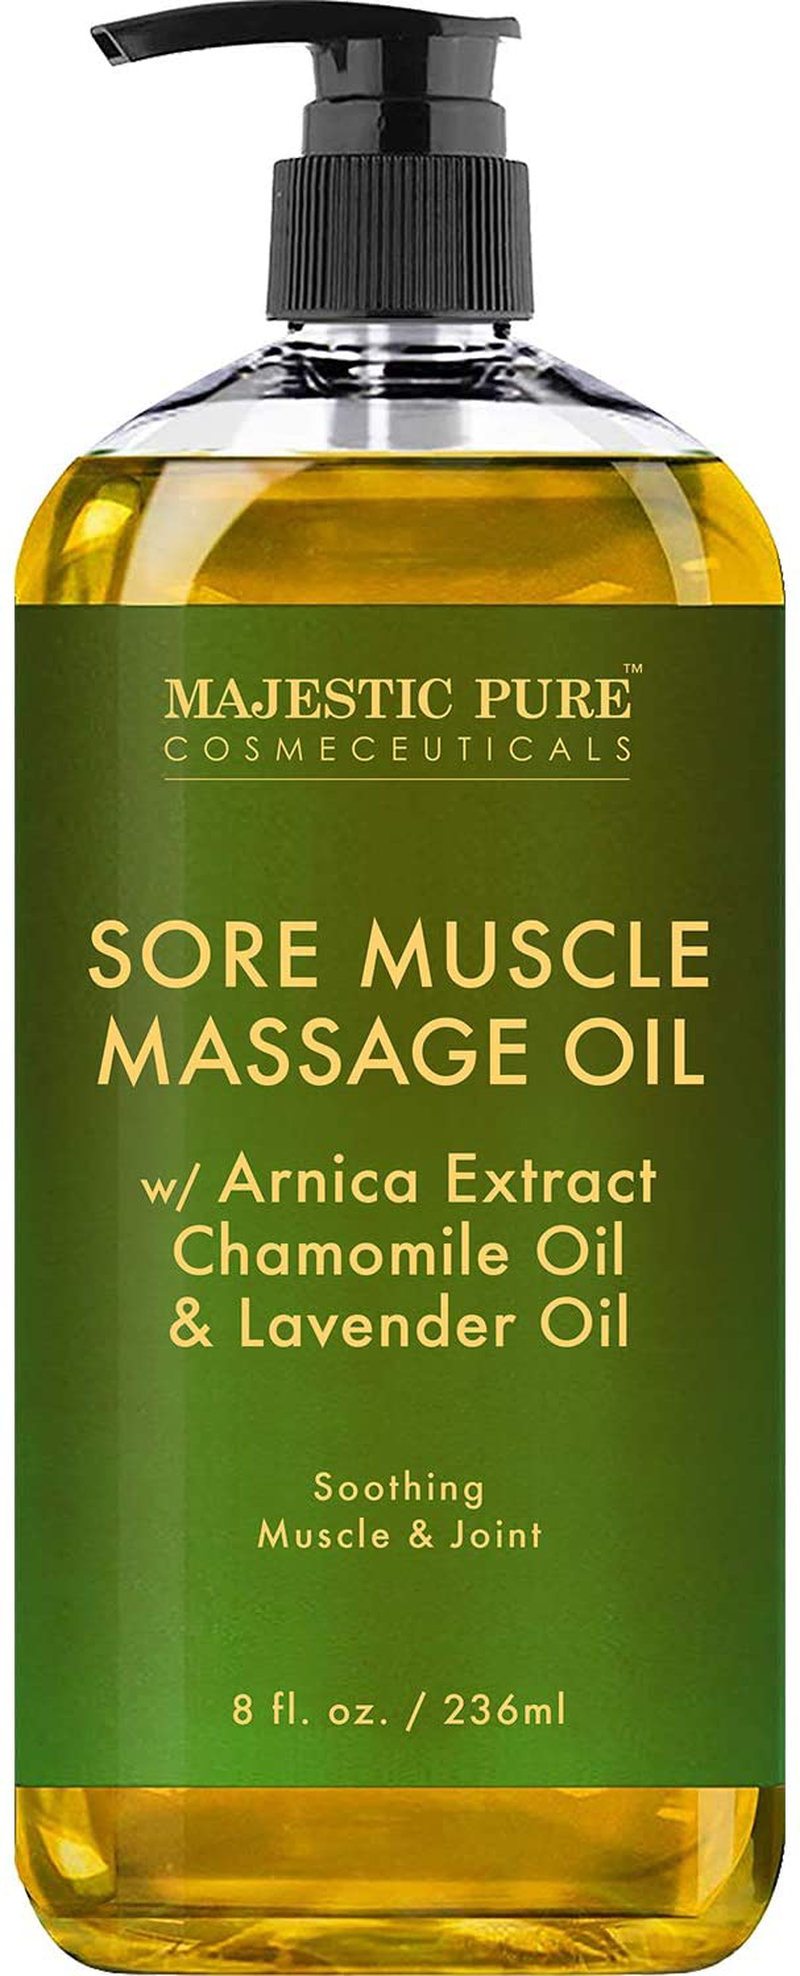 MAJESTIC PURE Arnica Sore Muscle Massage Oil for Body - Best Natural Therapy Therapy Oil with Lavender and Chamomile Essential Oils - Warming, Relaxing, Massaging Joint & Muscles